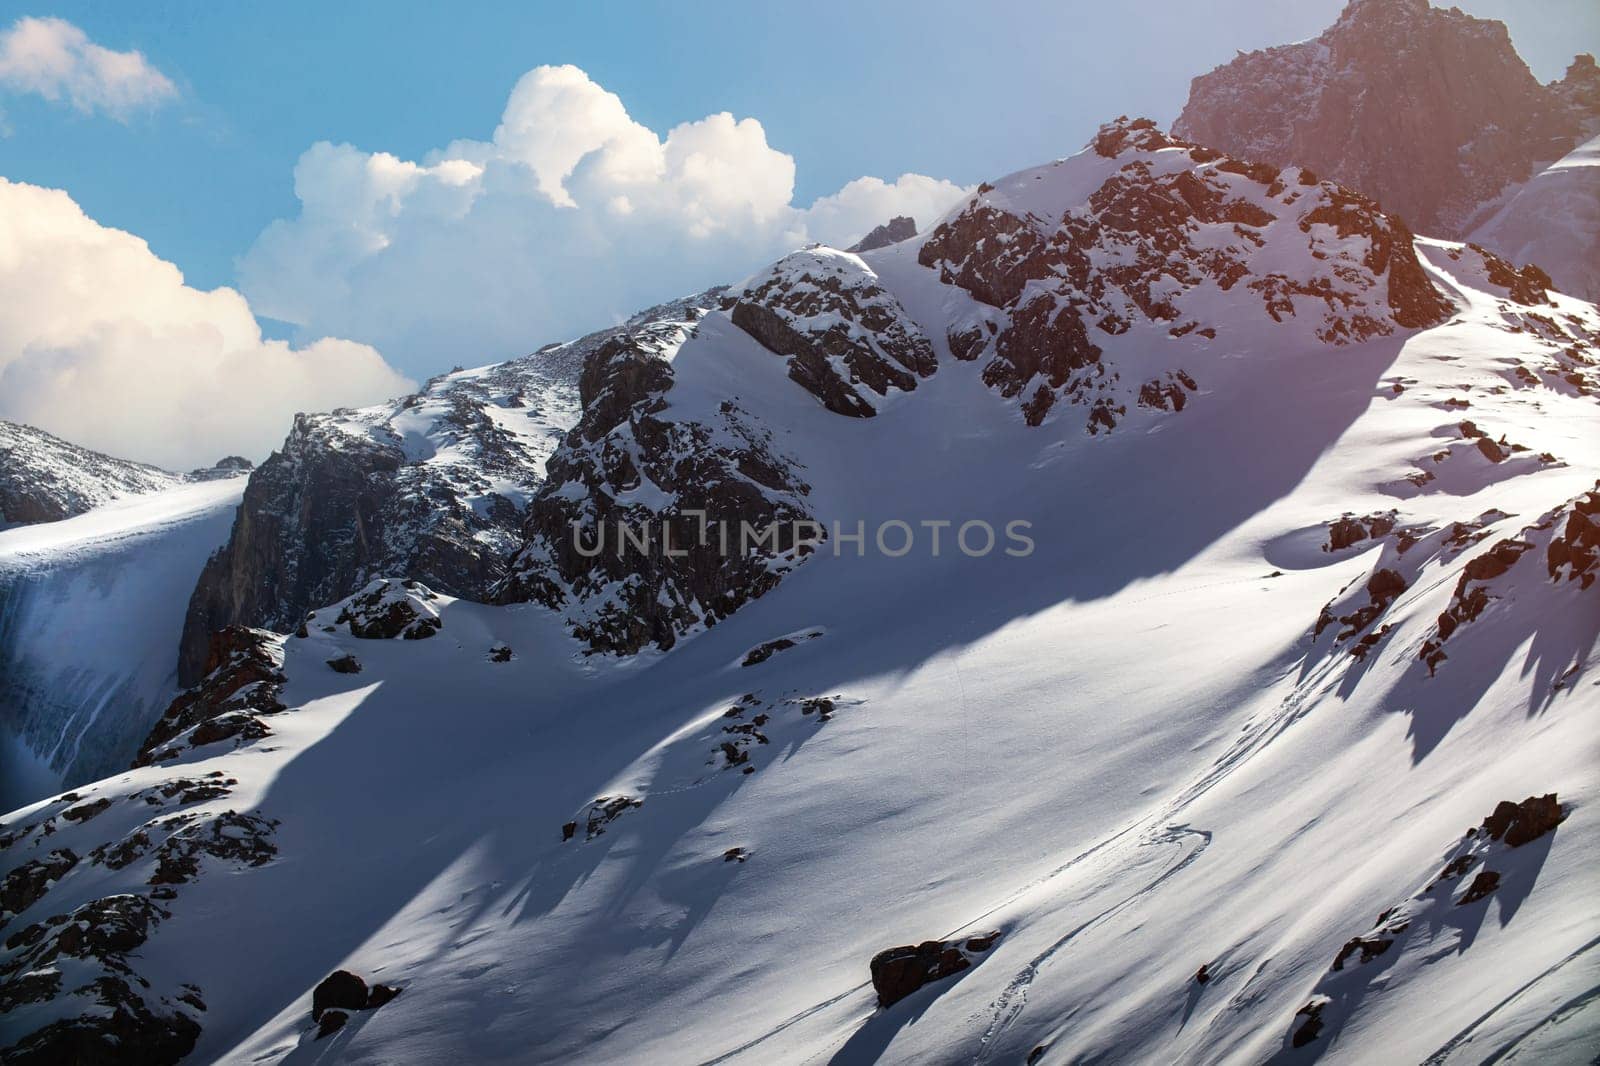 Beautiful amazing landscape of snowy mountains in central Asia in the Tian Shan mountains in Kazakhstan.